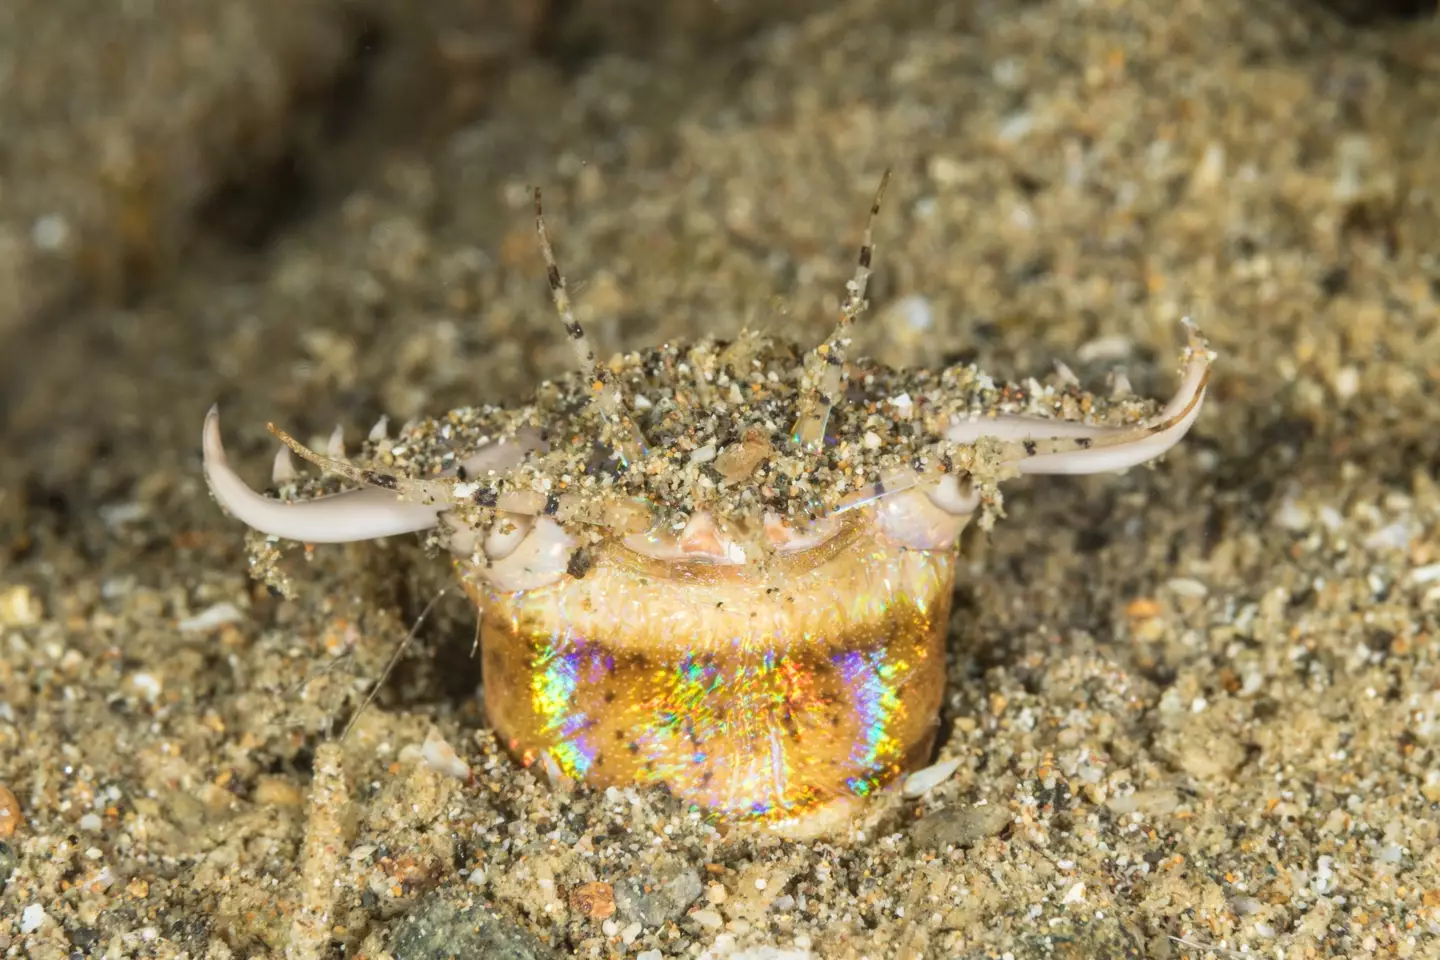 The terrifying sea creatures have no eyes and rely on their antennae to detect prey.